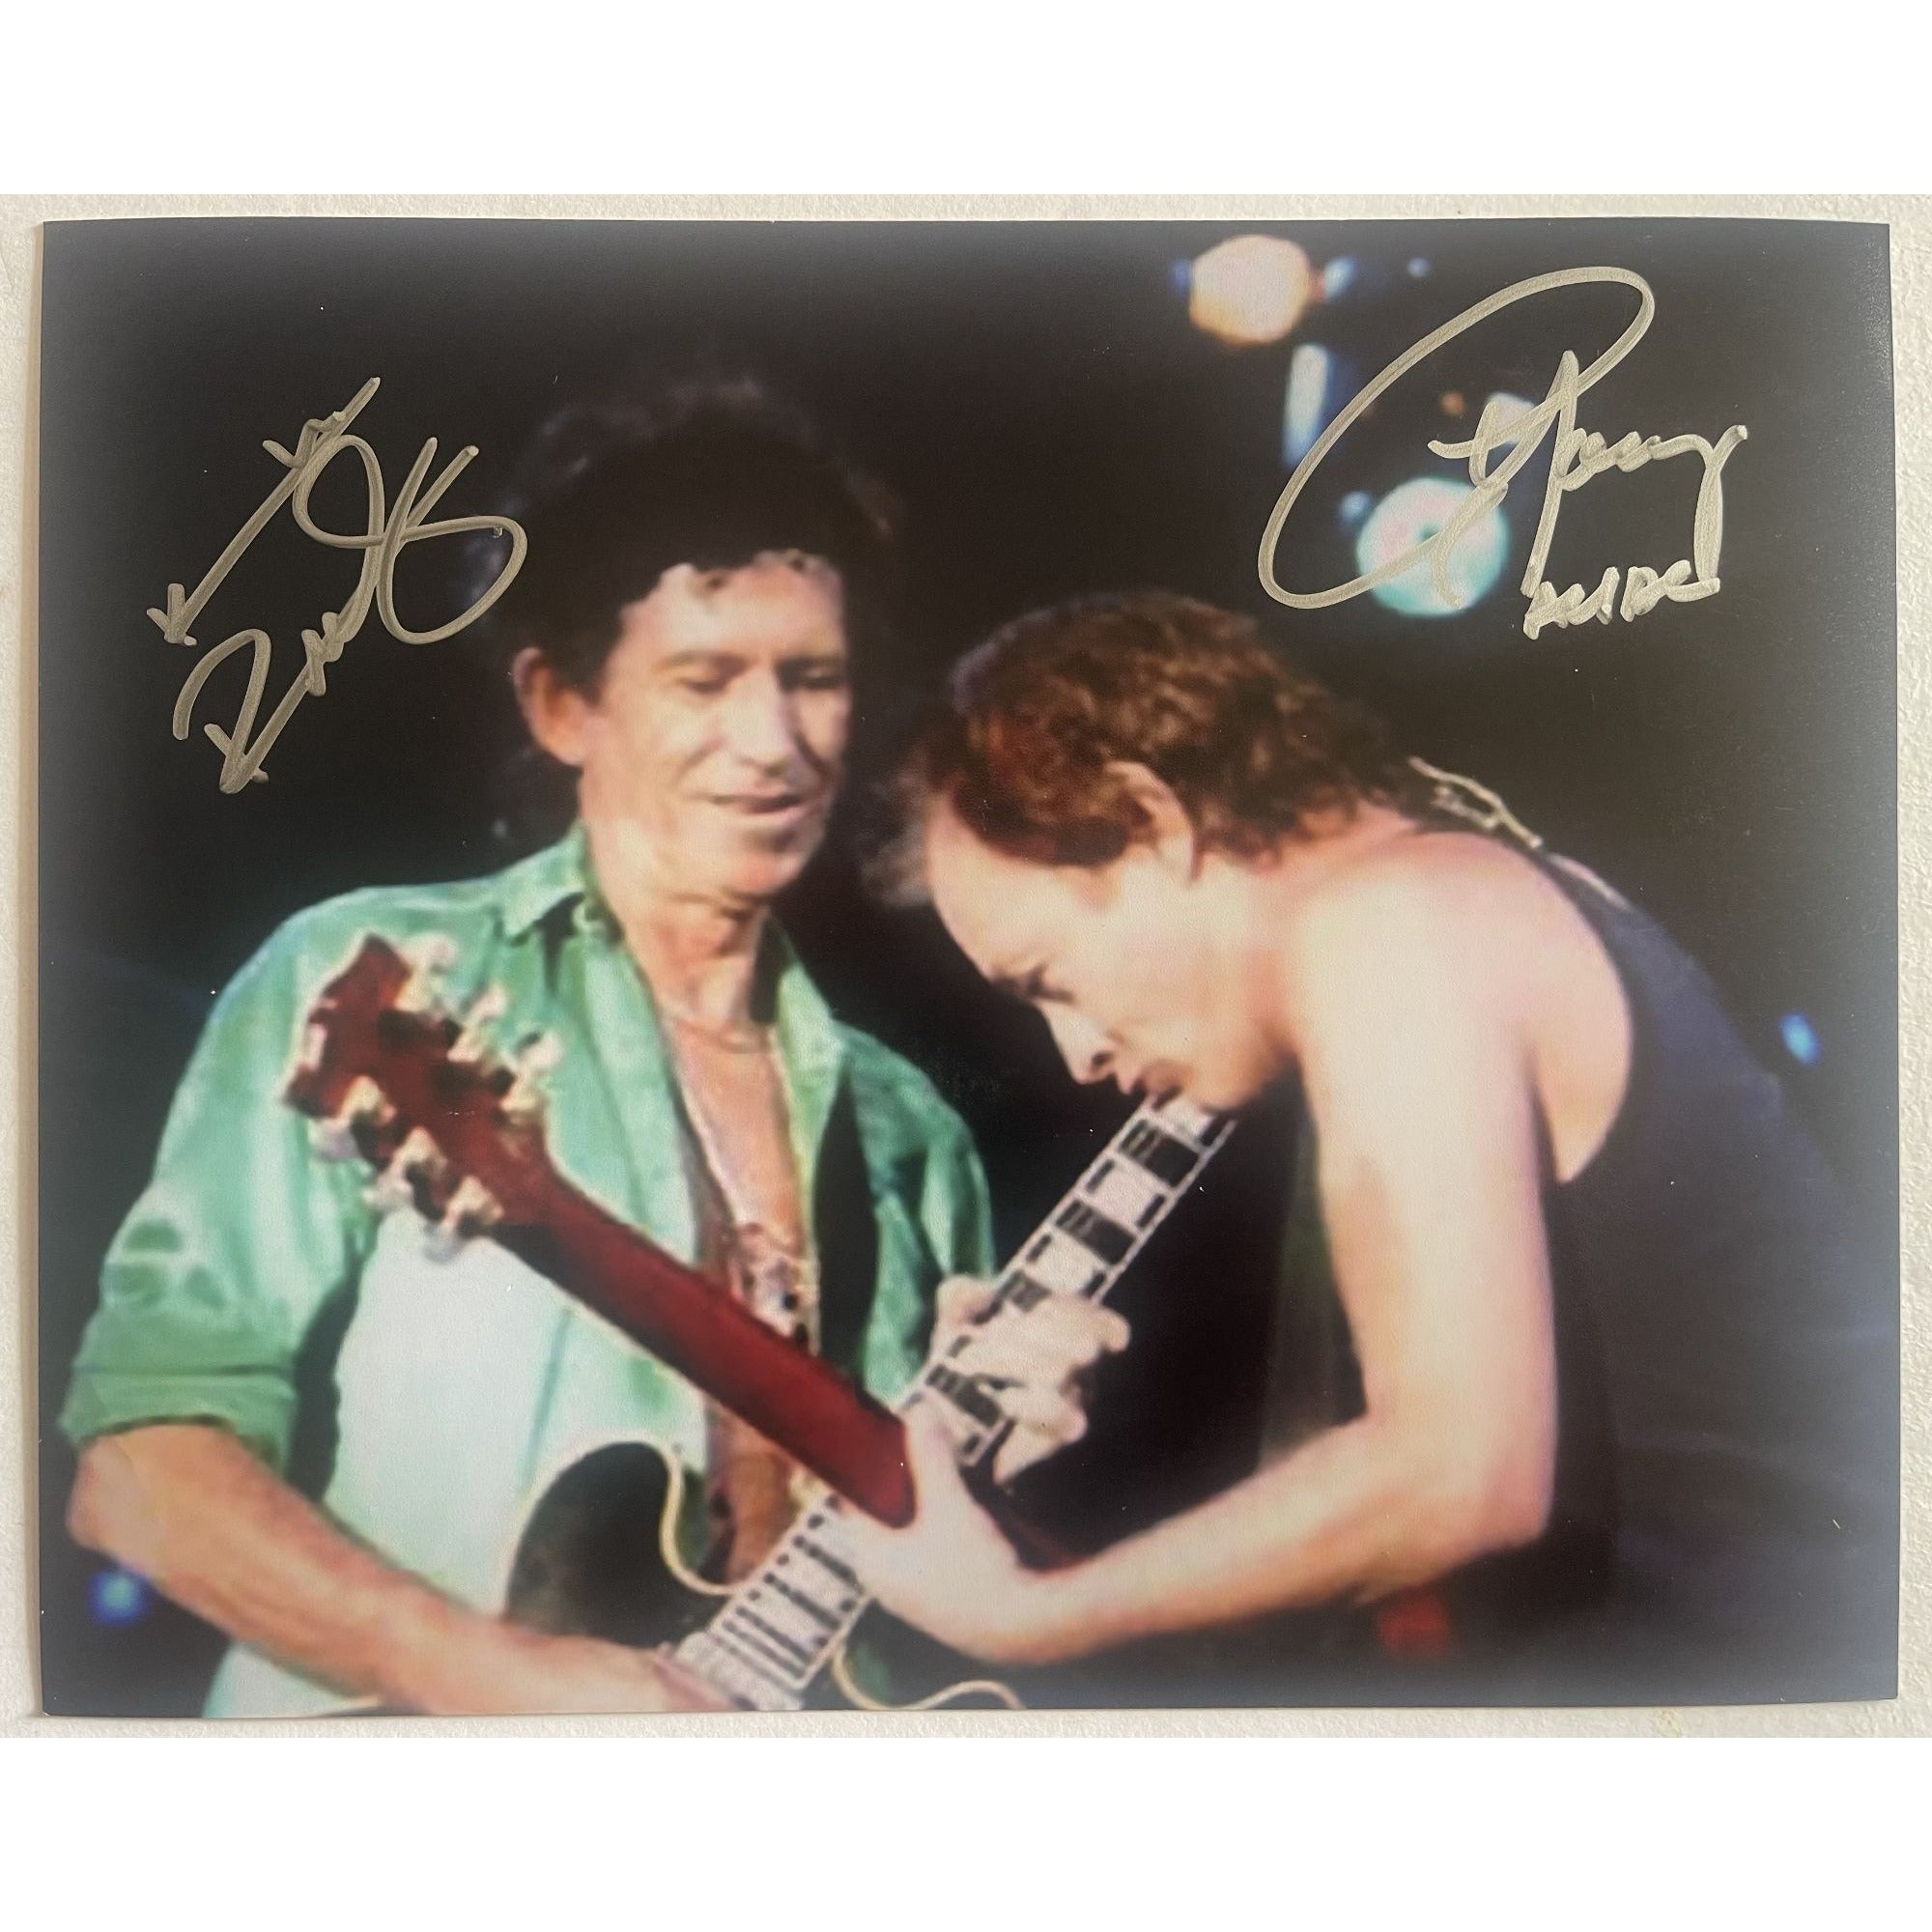 Keith Richards and Angus Young 8 x 10 photo signed with proof